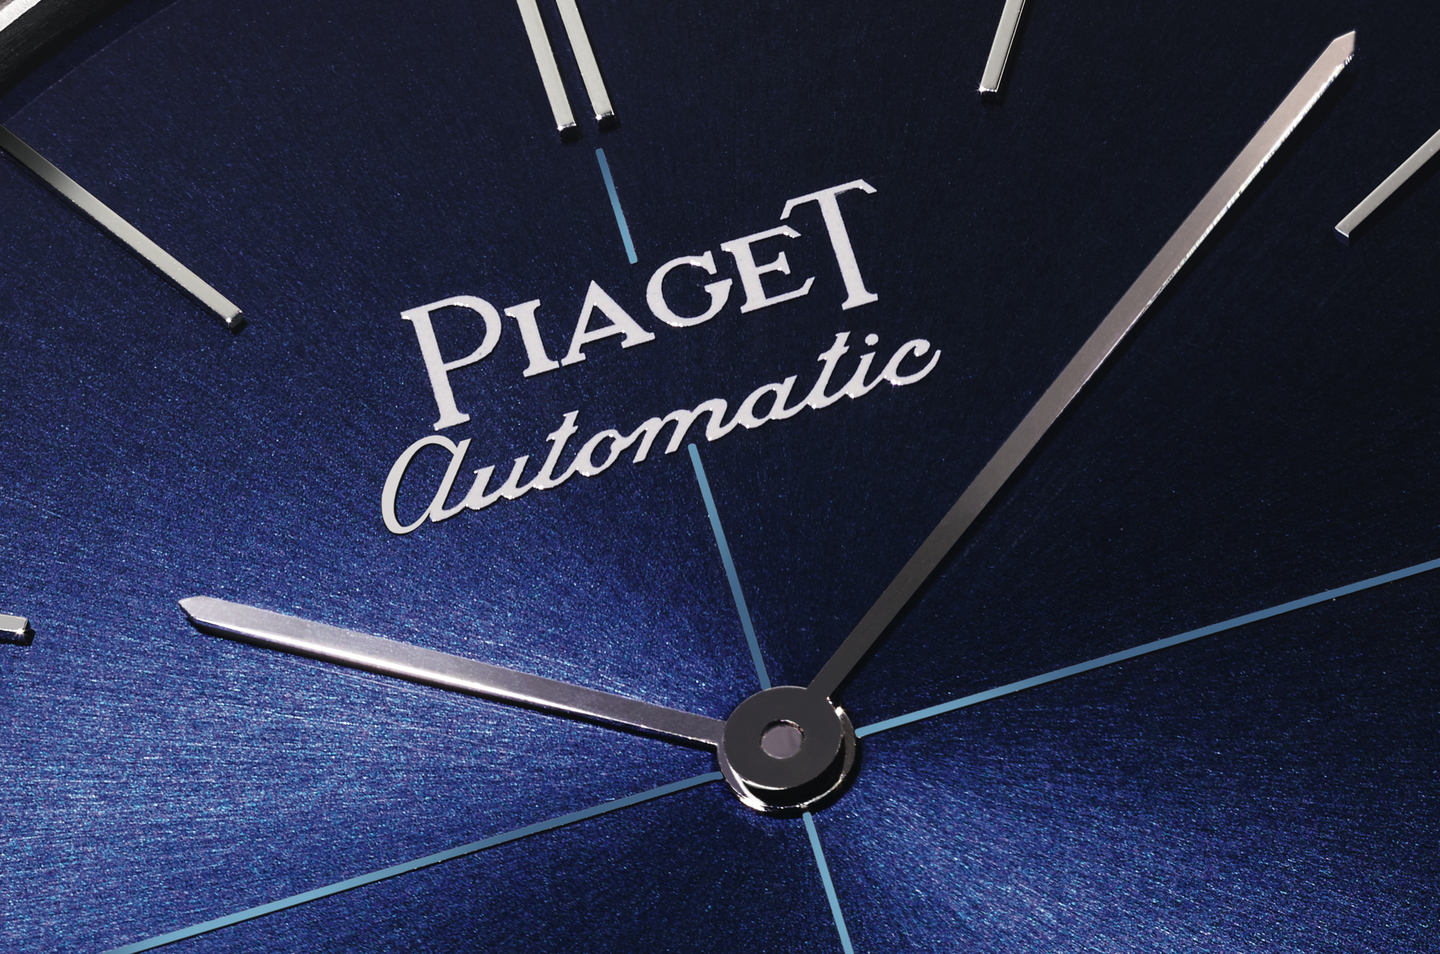 Piaget produces limited edition collection to celebrate 60 years of the Altiplano